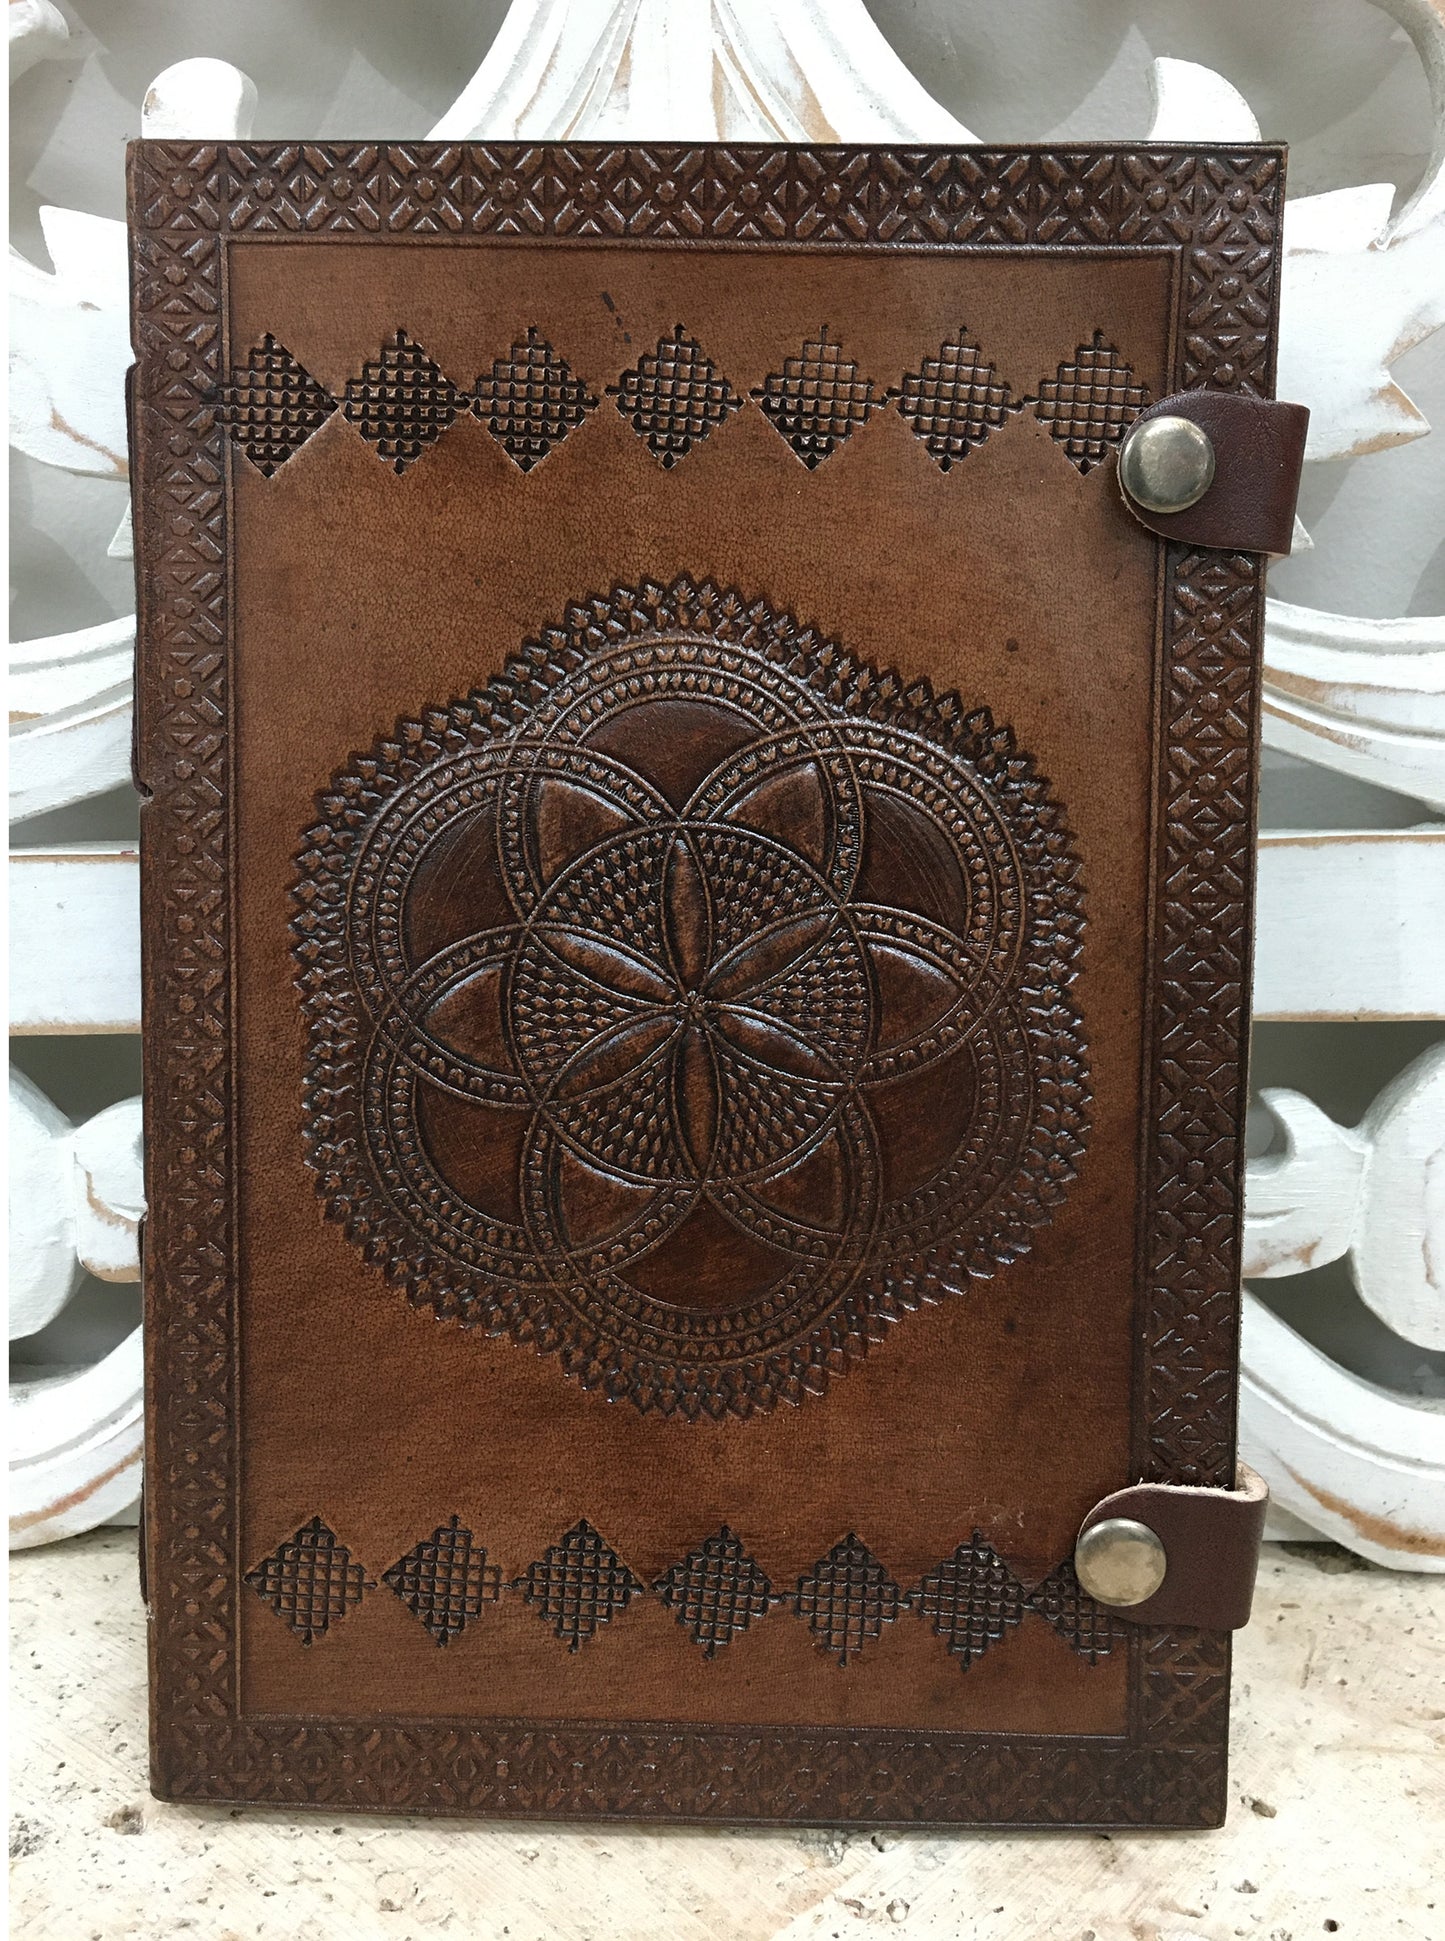 Hand Embossed Camel leather Journal with Button Clasp - 6" x 9" x 1"